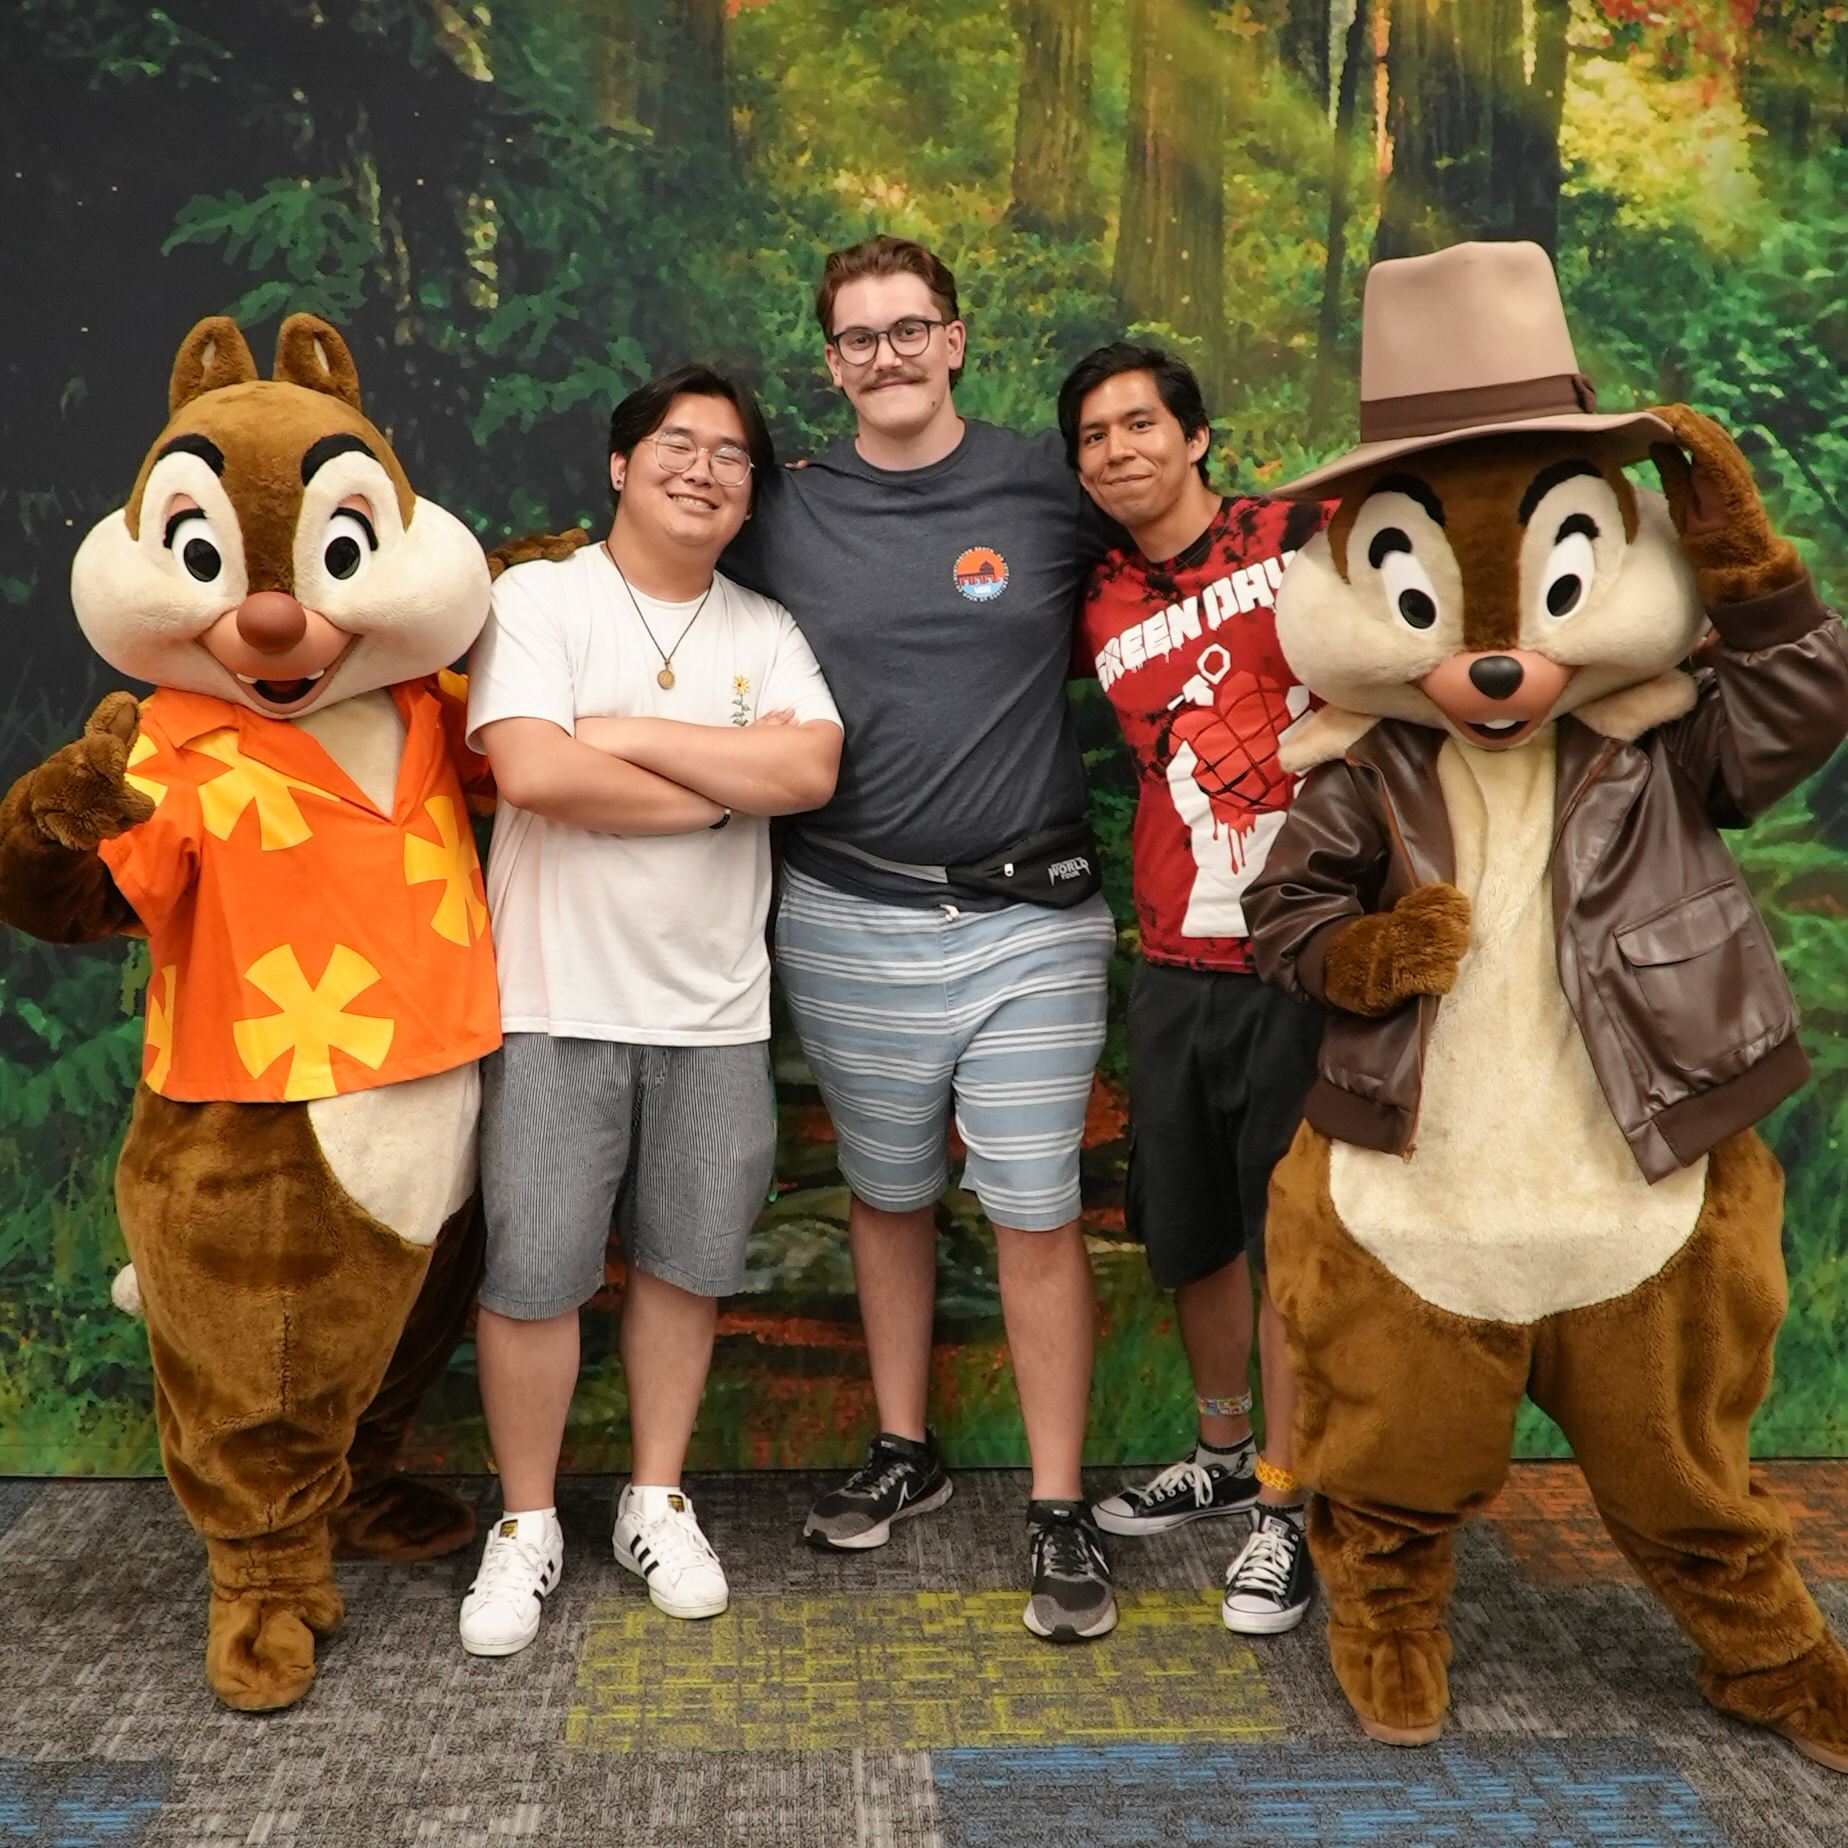 Three male Disney College Program participants pose for a photo standing between Chip and Dale character performers at Walt Disney World Resort